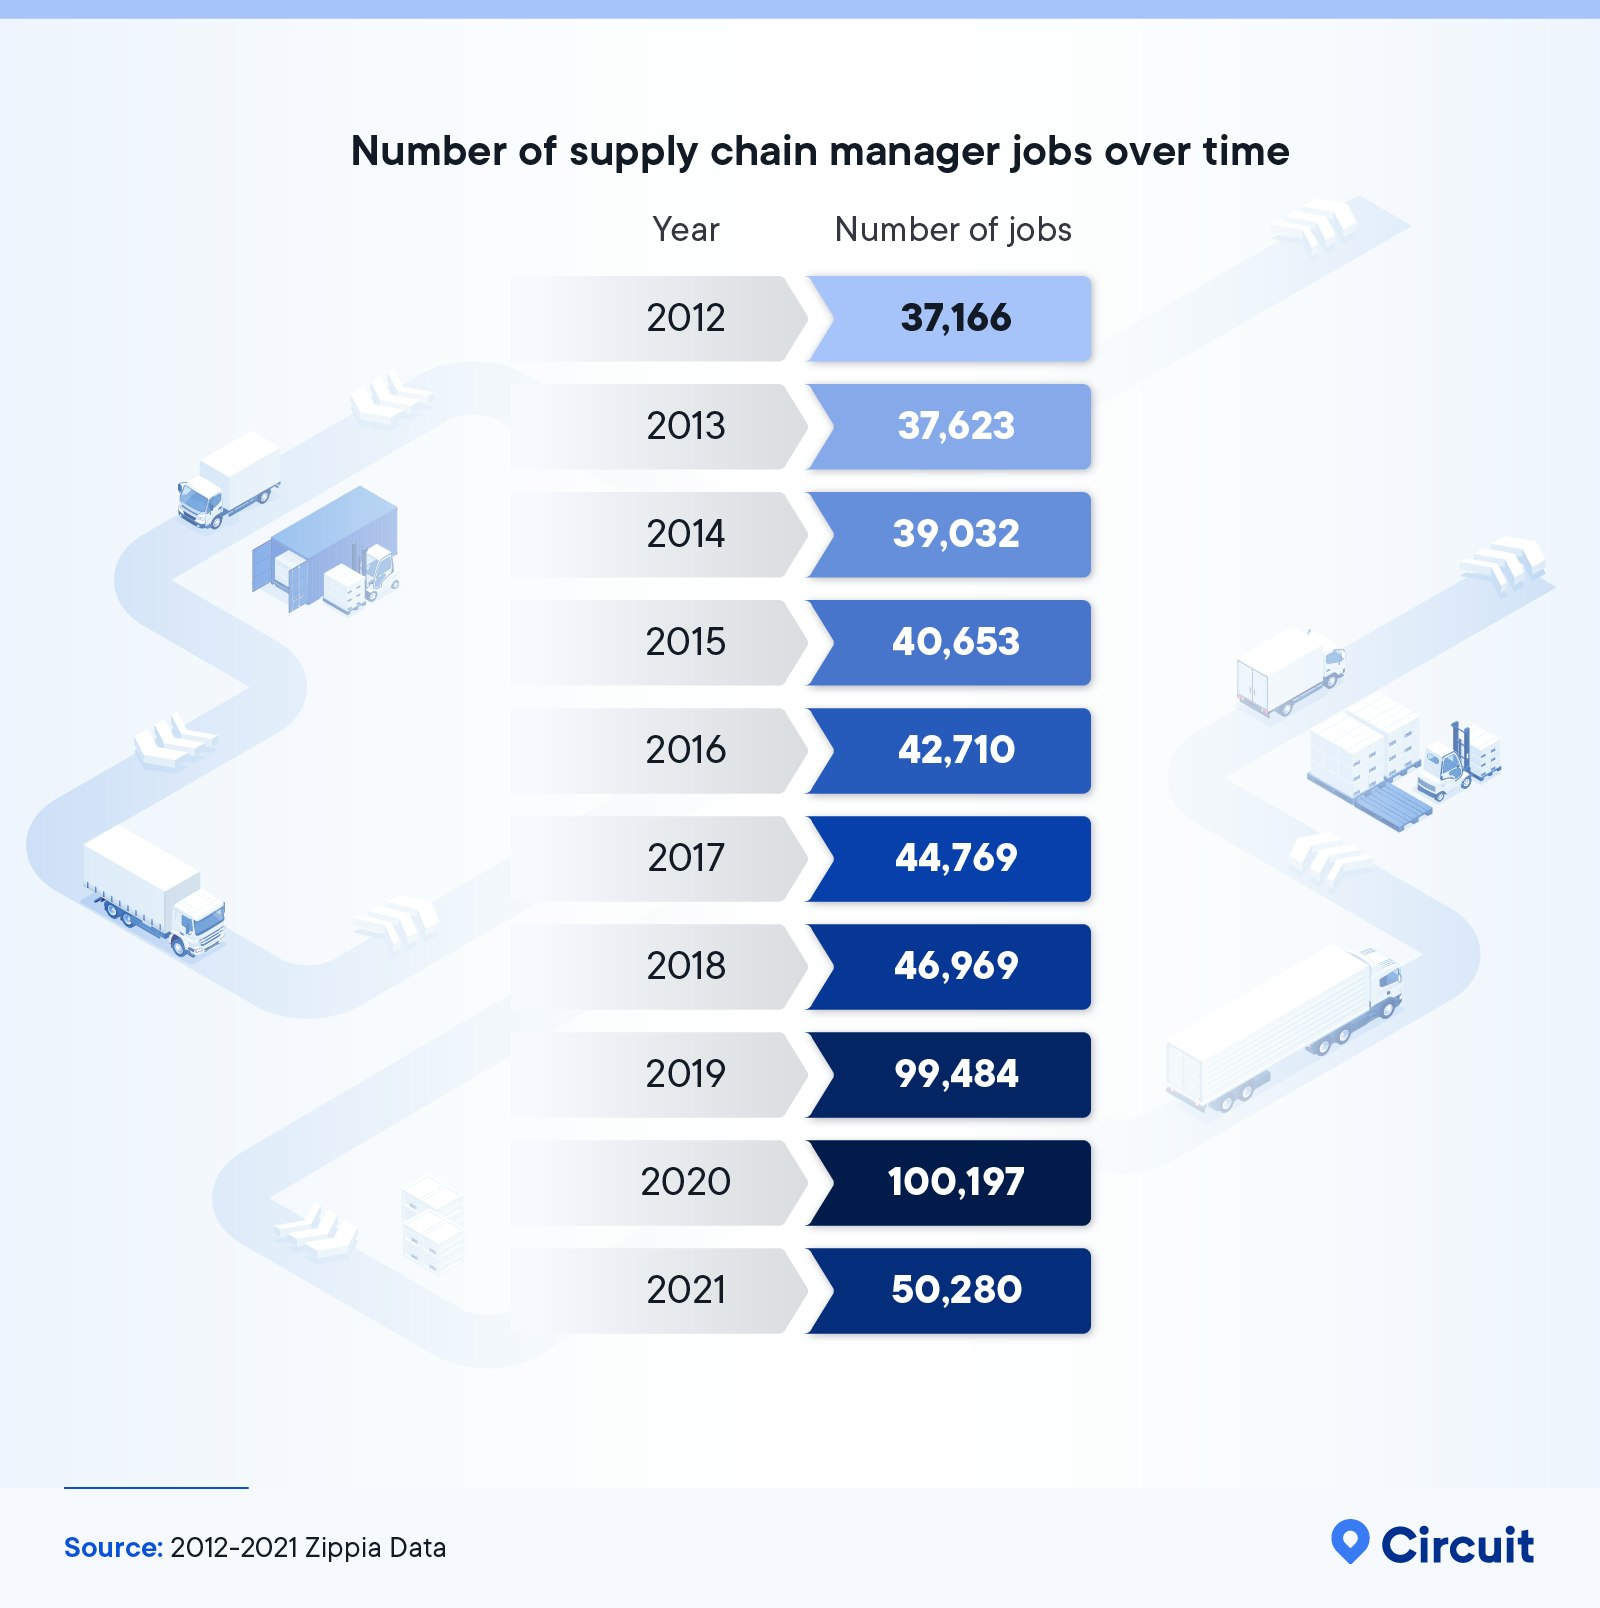 Number of supply chain manager jobs over time